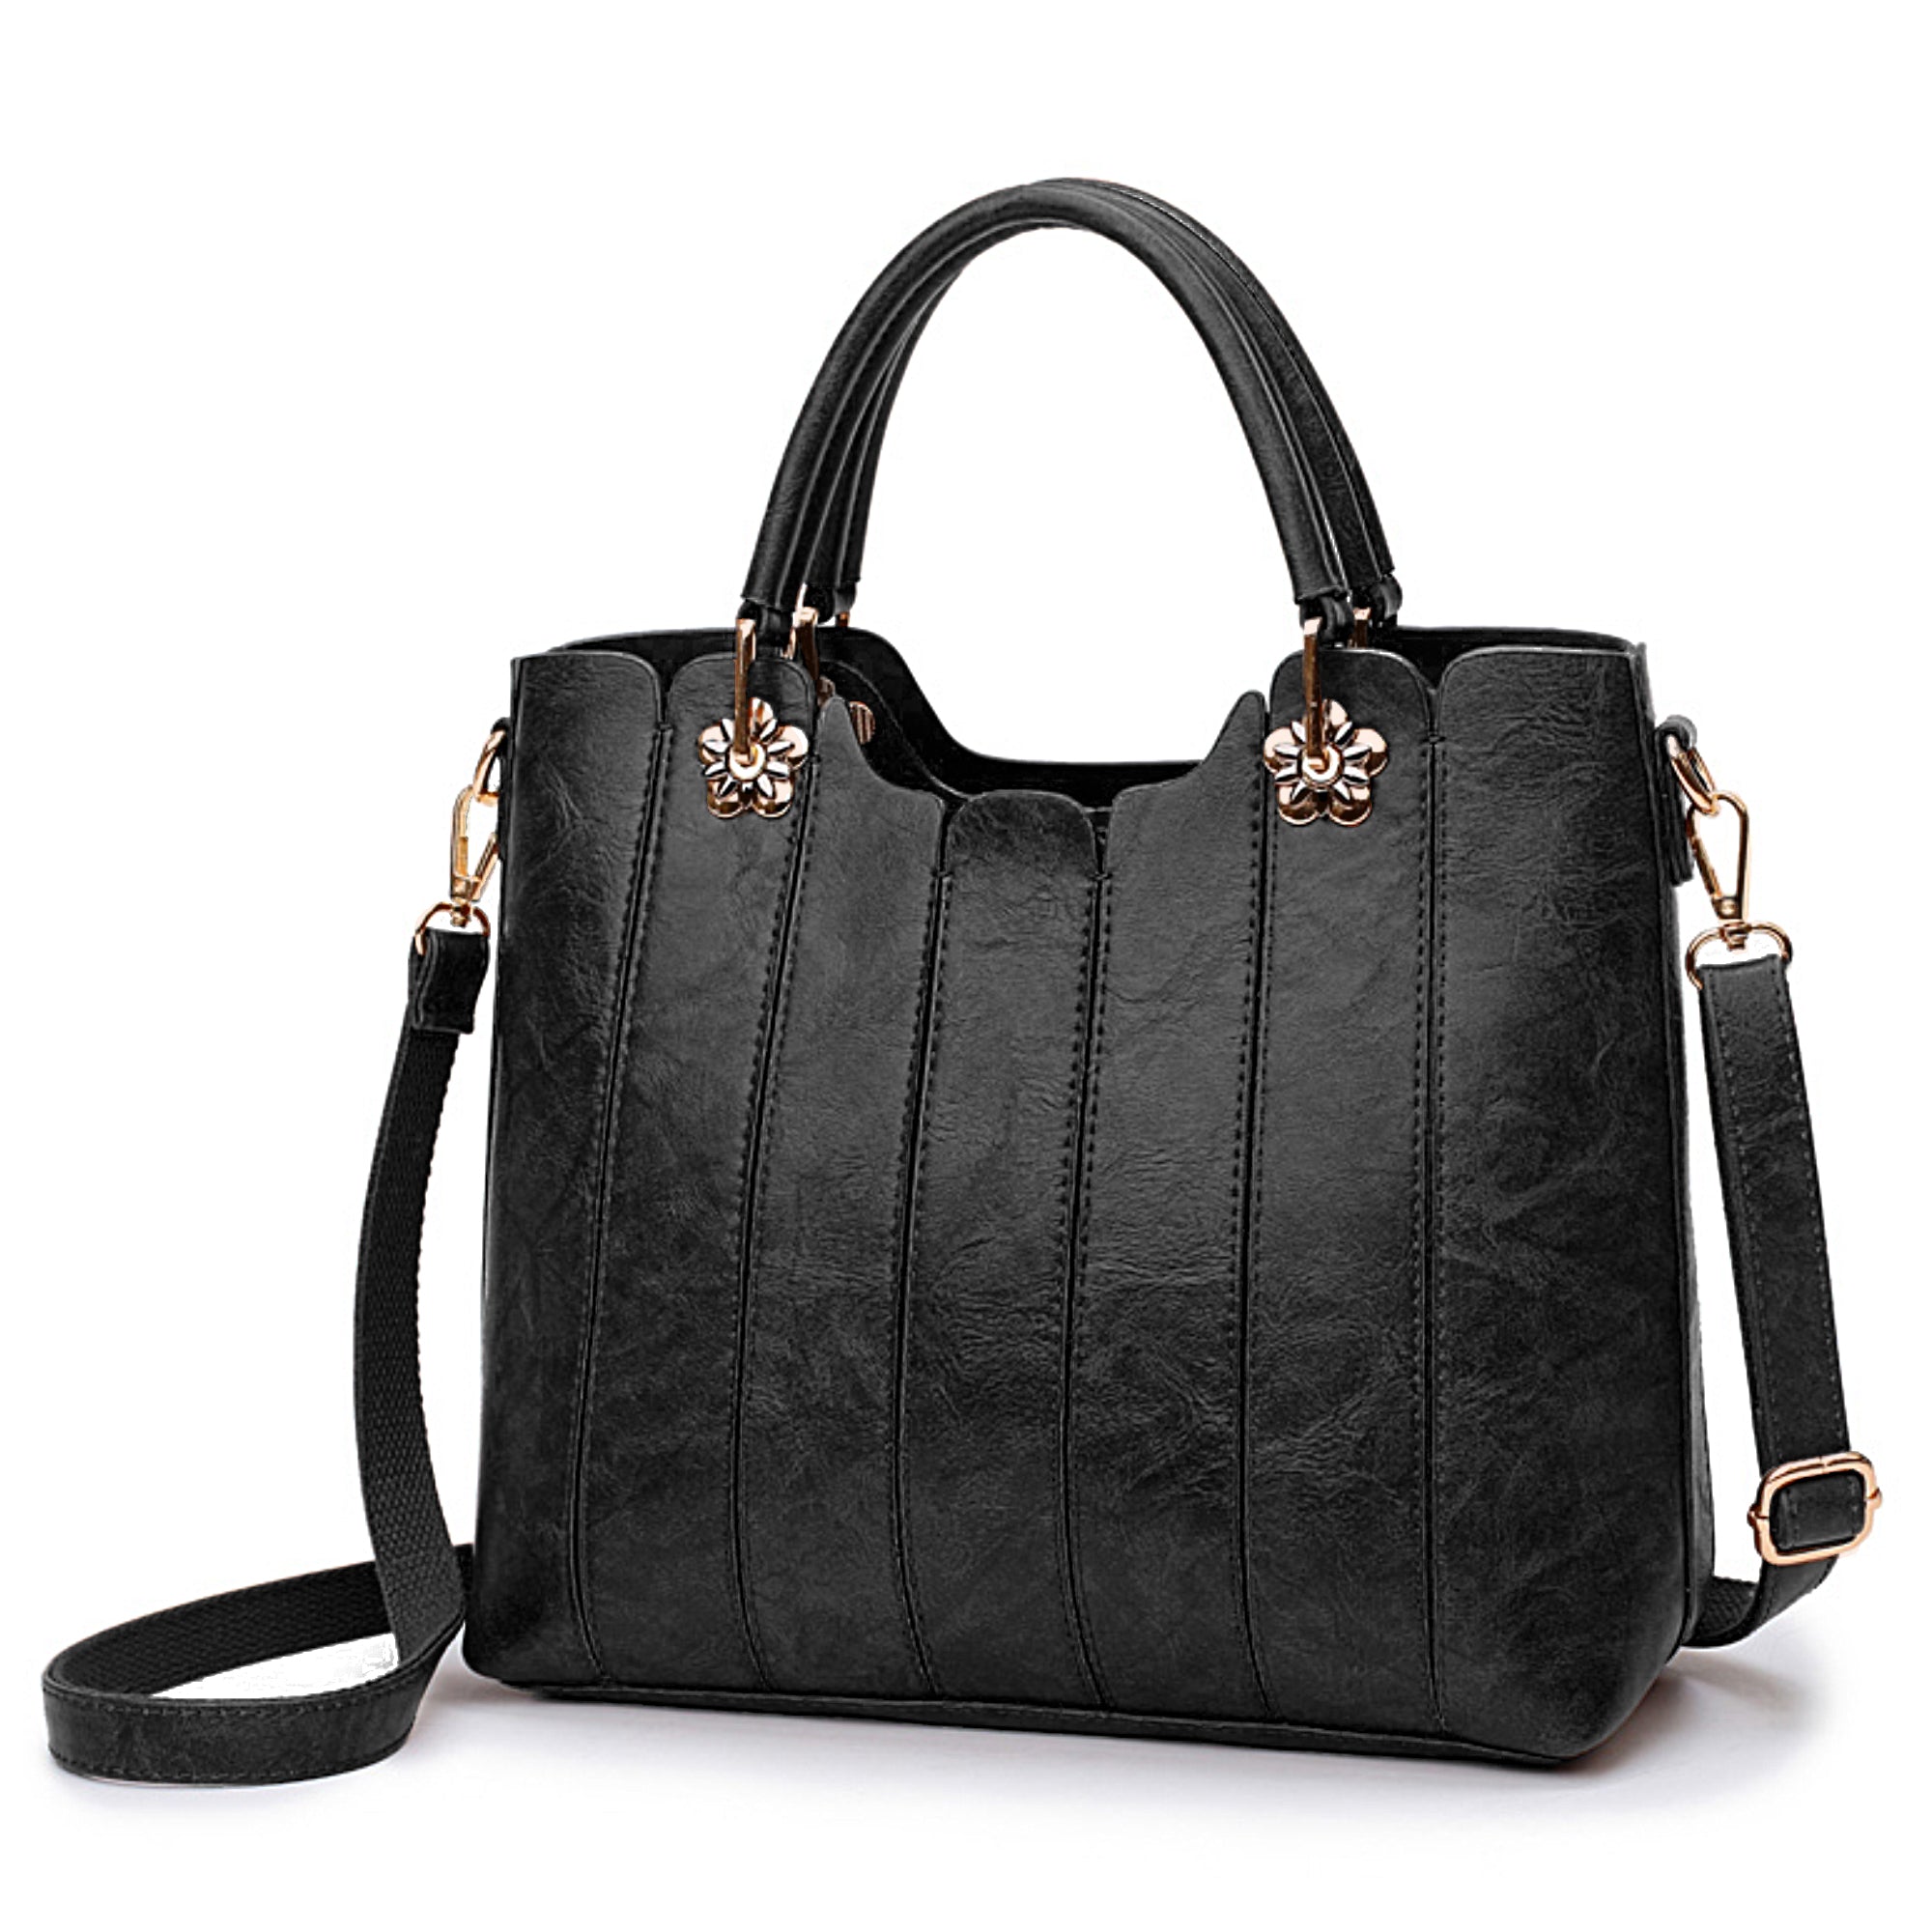 Buy WildHorn Ladies Leather Purse… (Black) at Amazon.in